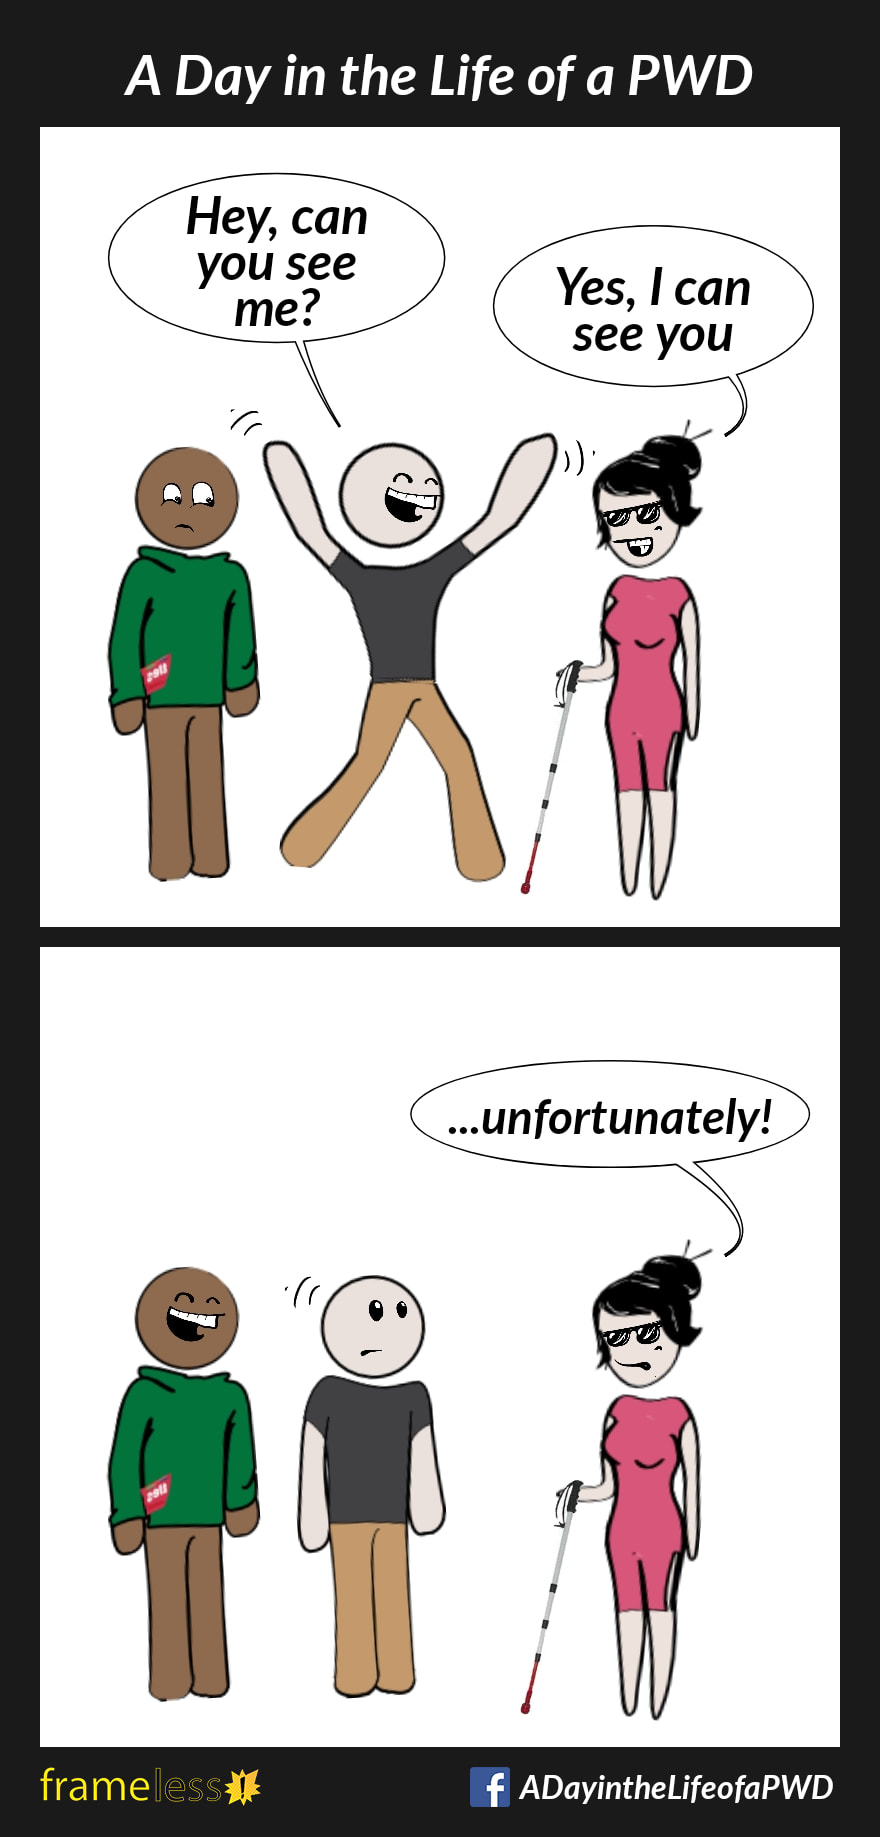 COMIC STRIP 
A Day in the Life of a PWD

Frame 1:
A woman wearing dark glasses and using a white cane is approached by two men.
MAN A (grinning and waving his arms): Hey, can you see me?
WOMAN: Yes, I can see you

Frame 2:
WOMAN: ...unfortunately!
Man B laughs.